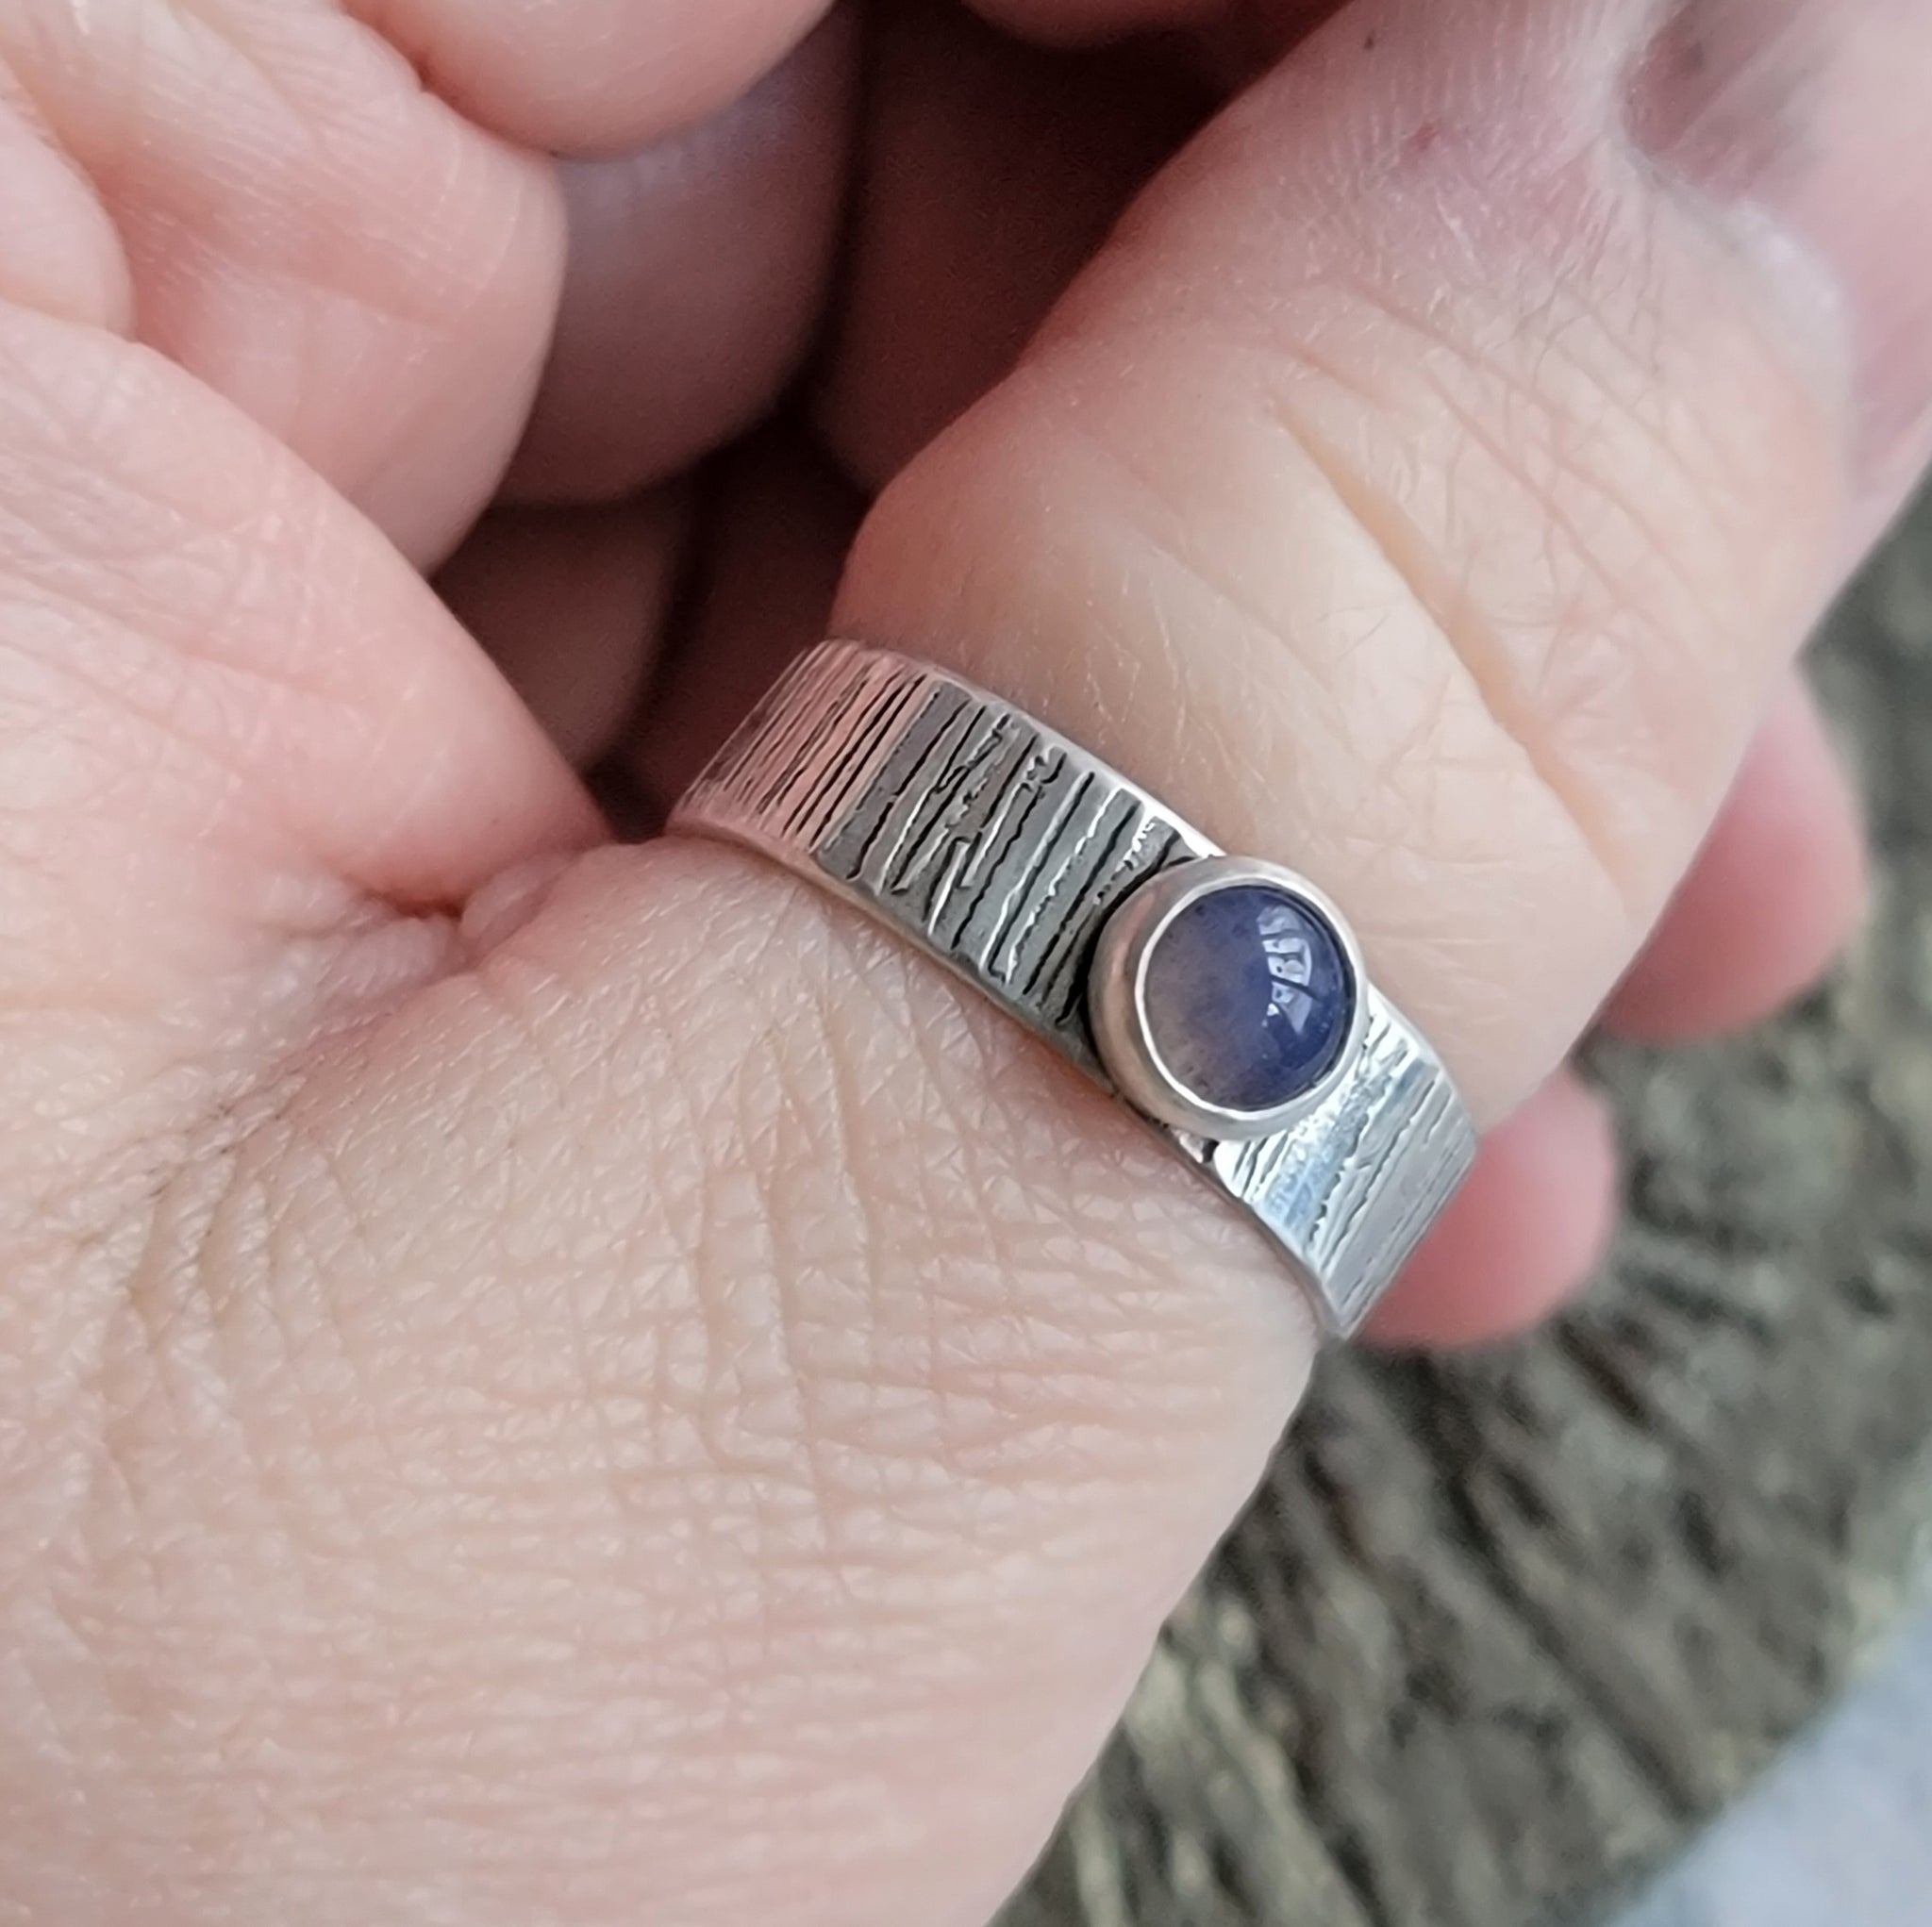 Leland Blue Textured Band Ring in Sterling Silver size 10.75